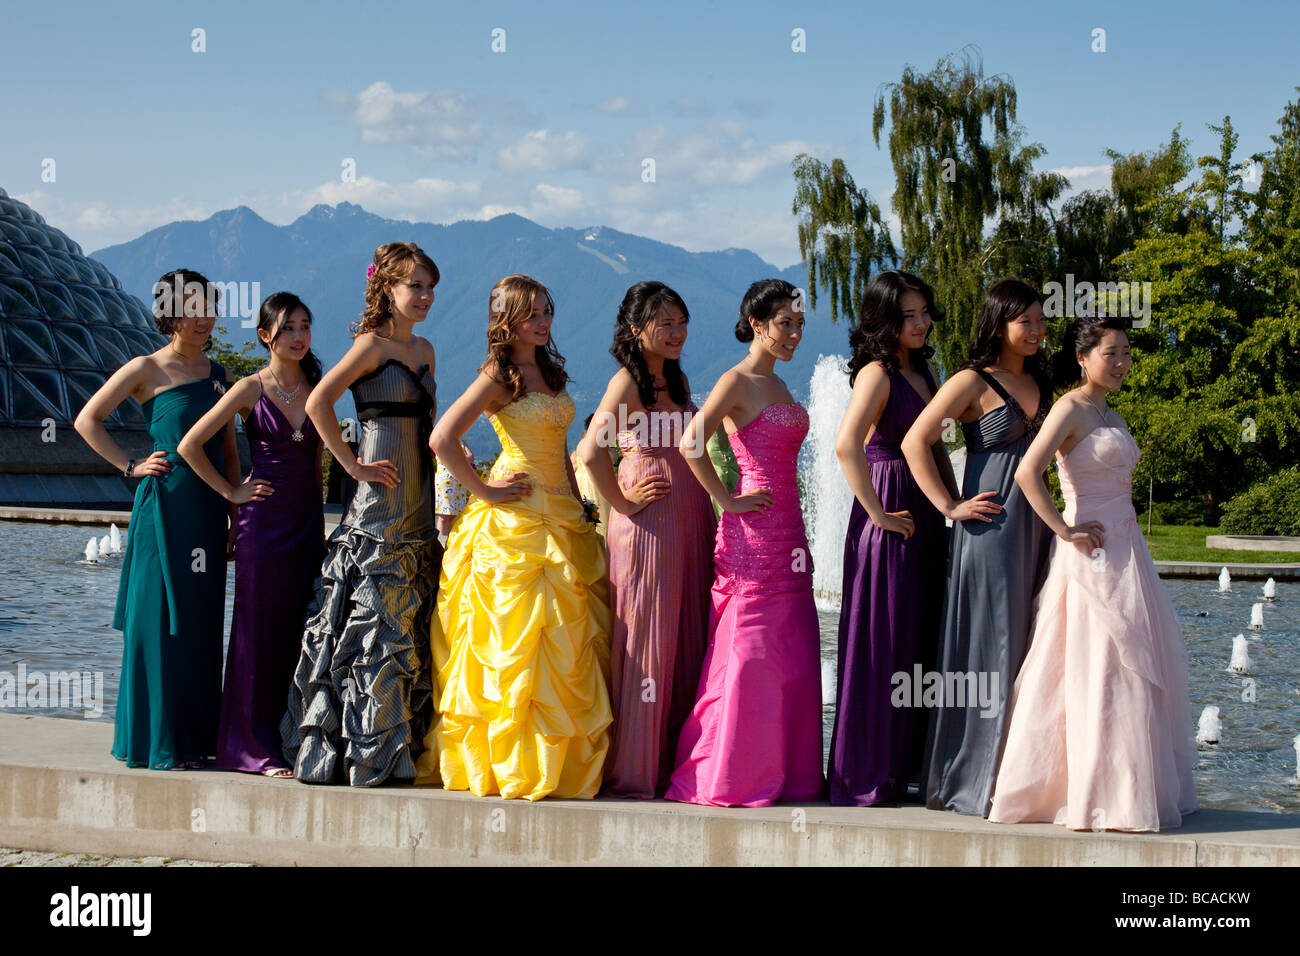 students in formal dress for school prom posing for photographs at Queen Elizabeth Park, Vancouver, British Columbia, Canada Stock Photo